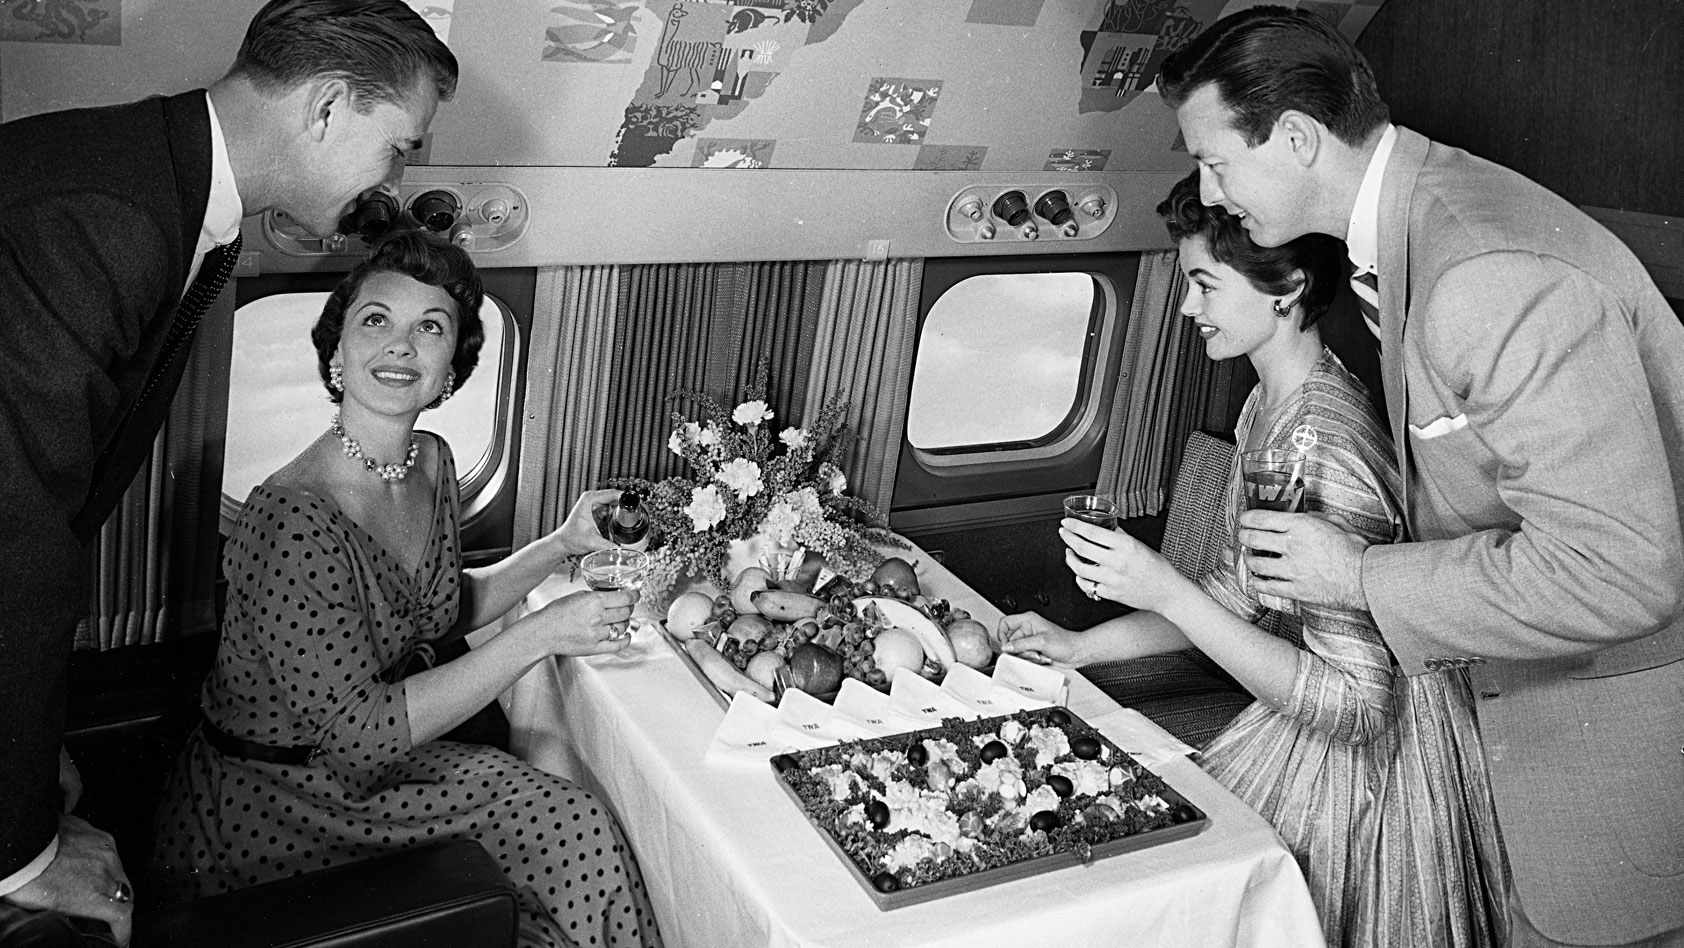 Travelers are served a buffet on board a Lockheed Super Constellation while flying with former American airline Trans World Airlines (TWA) in 1955.